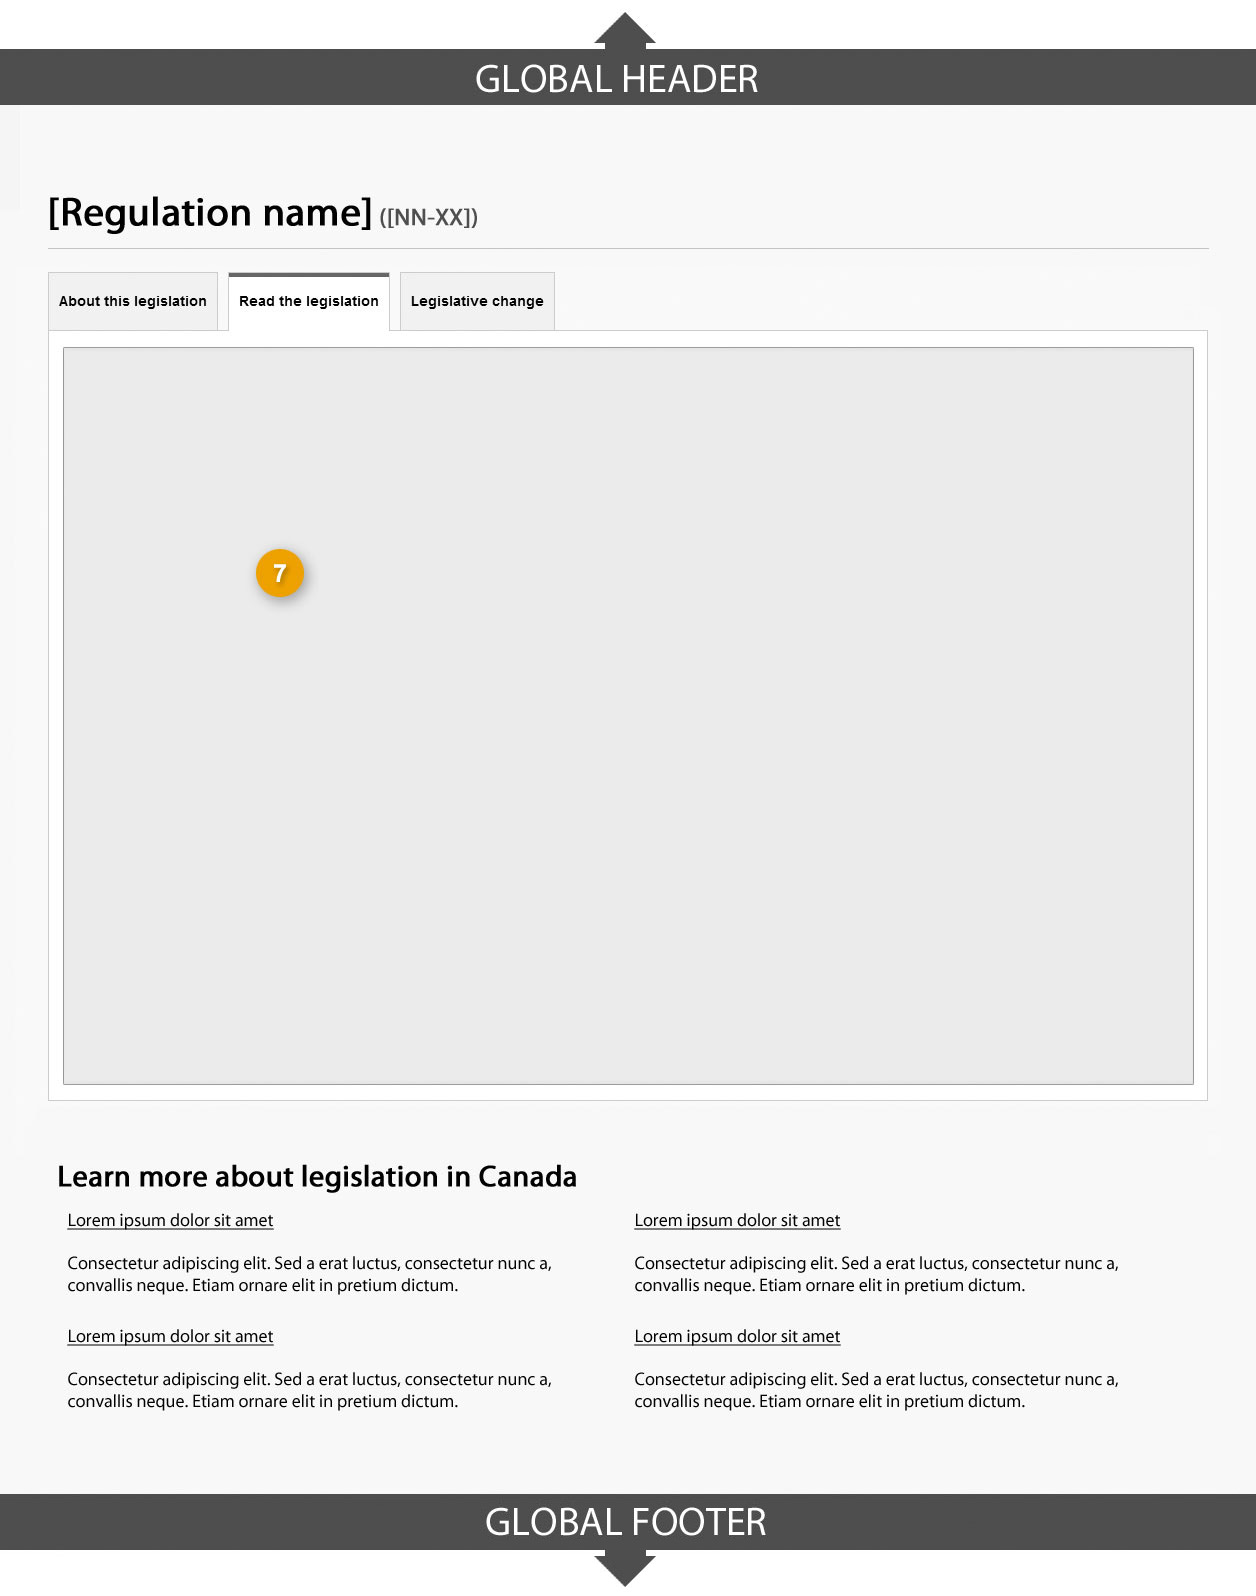 Template of regulation profile page showing the “Read the legislation” tab. Read top to bottom and left to right. Specifications detailed below.